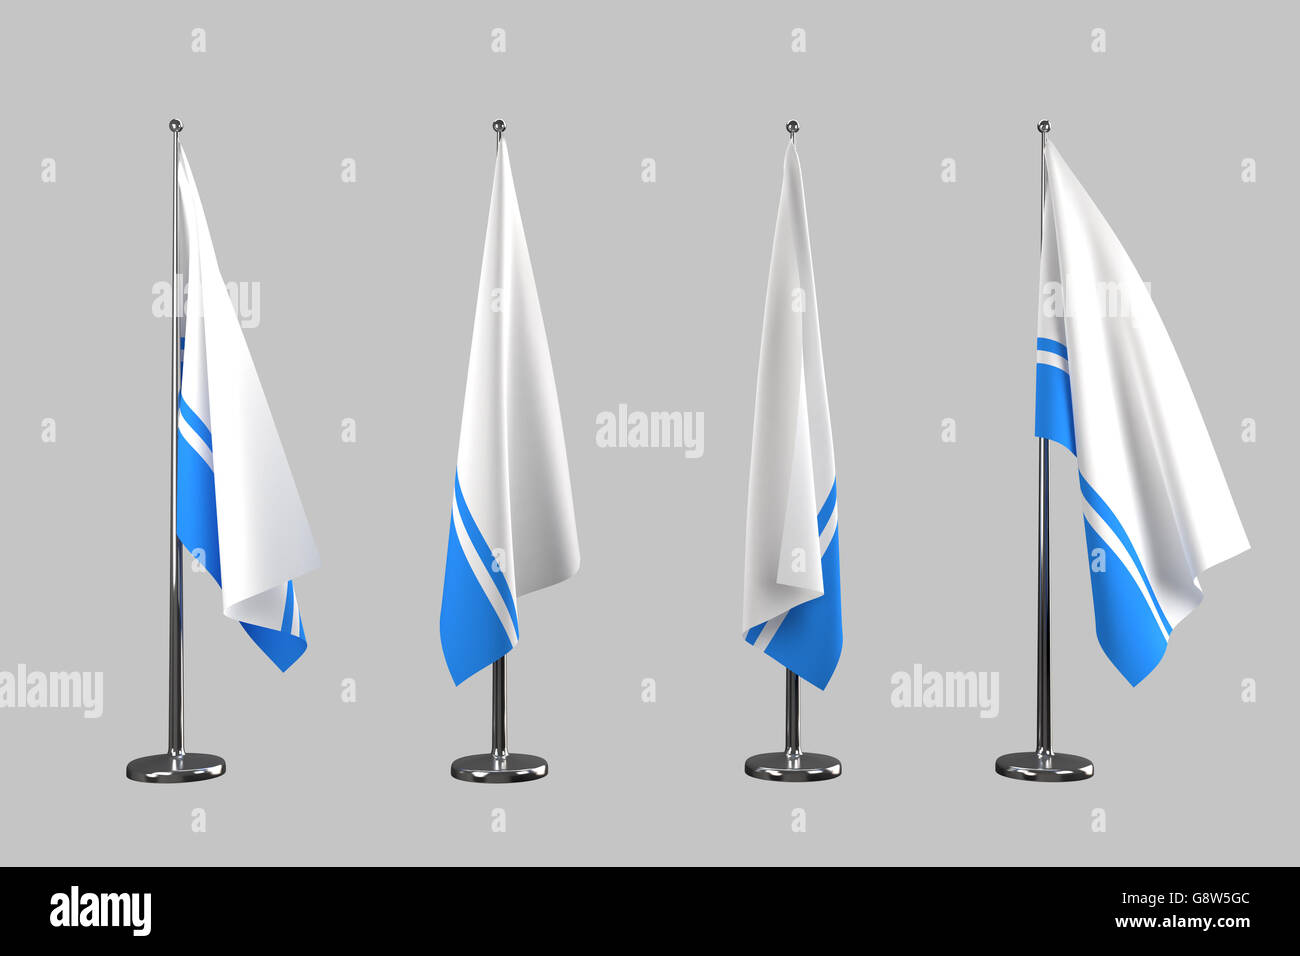 Altai Republic indoor flags isolate on white background Stock Photo - Alamy